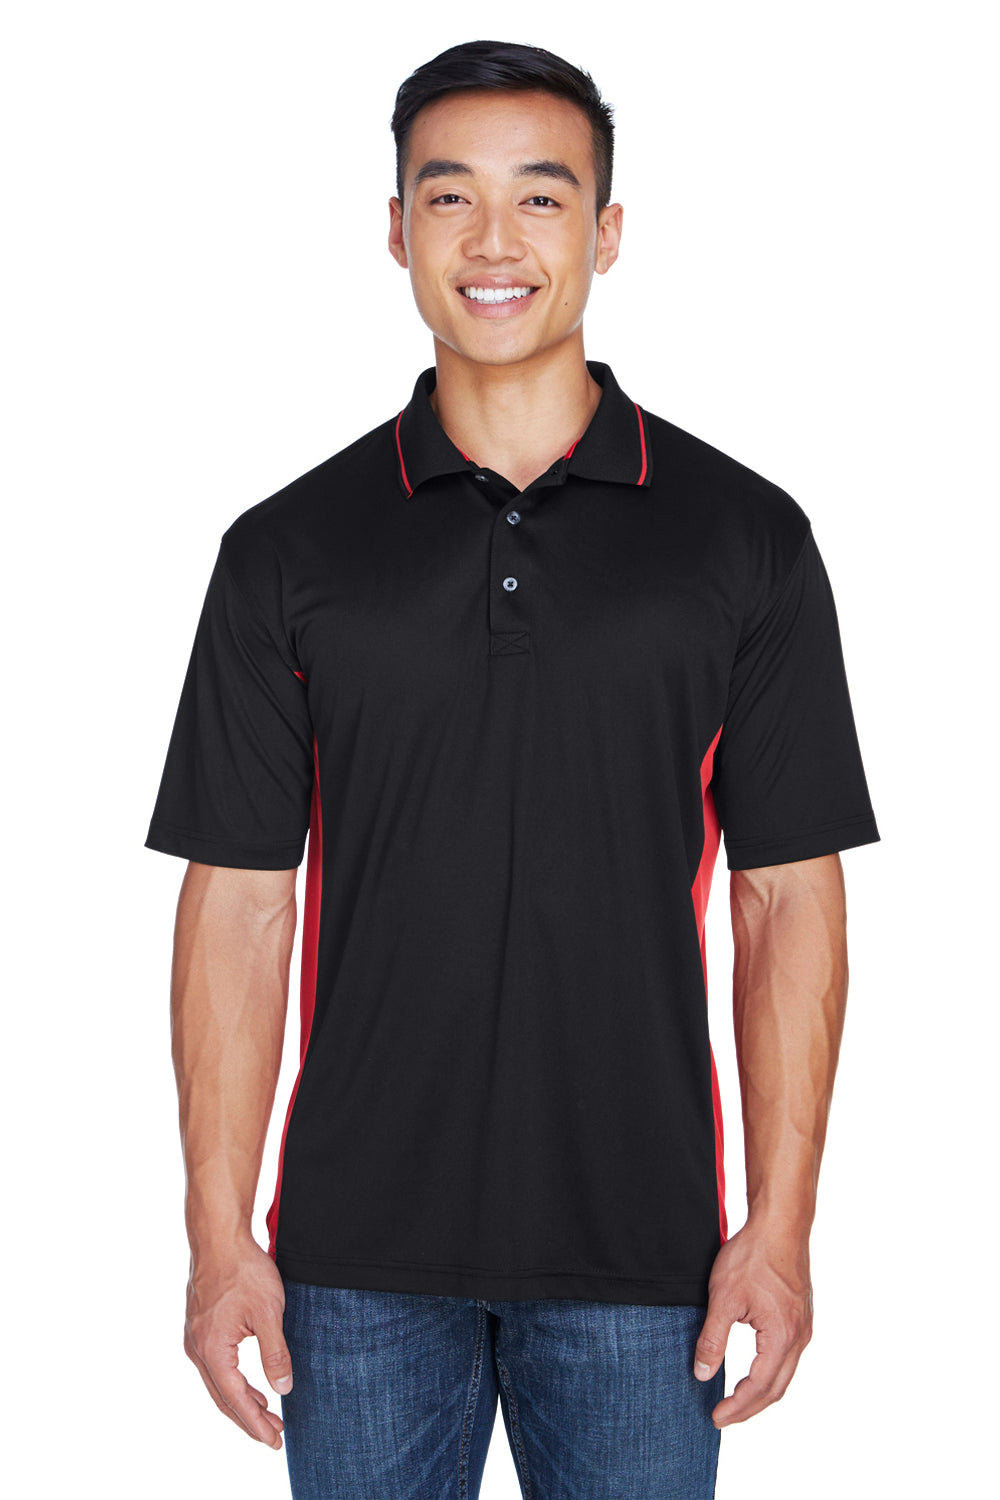 UltraClub 8406 Mens Cool & Dry Moisture Wicking Short Sleeve Polo Shirt Black/Red Front